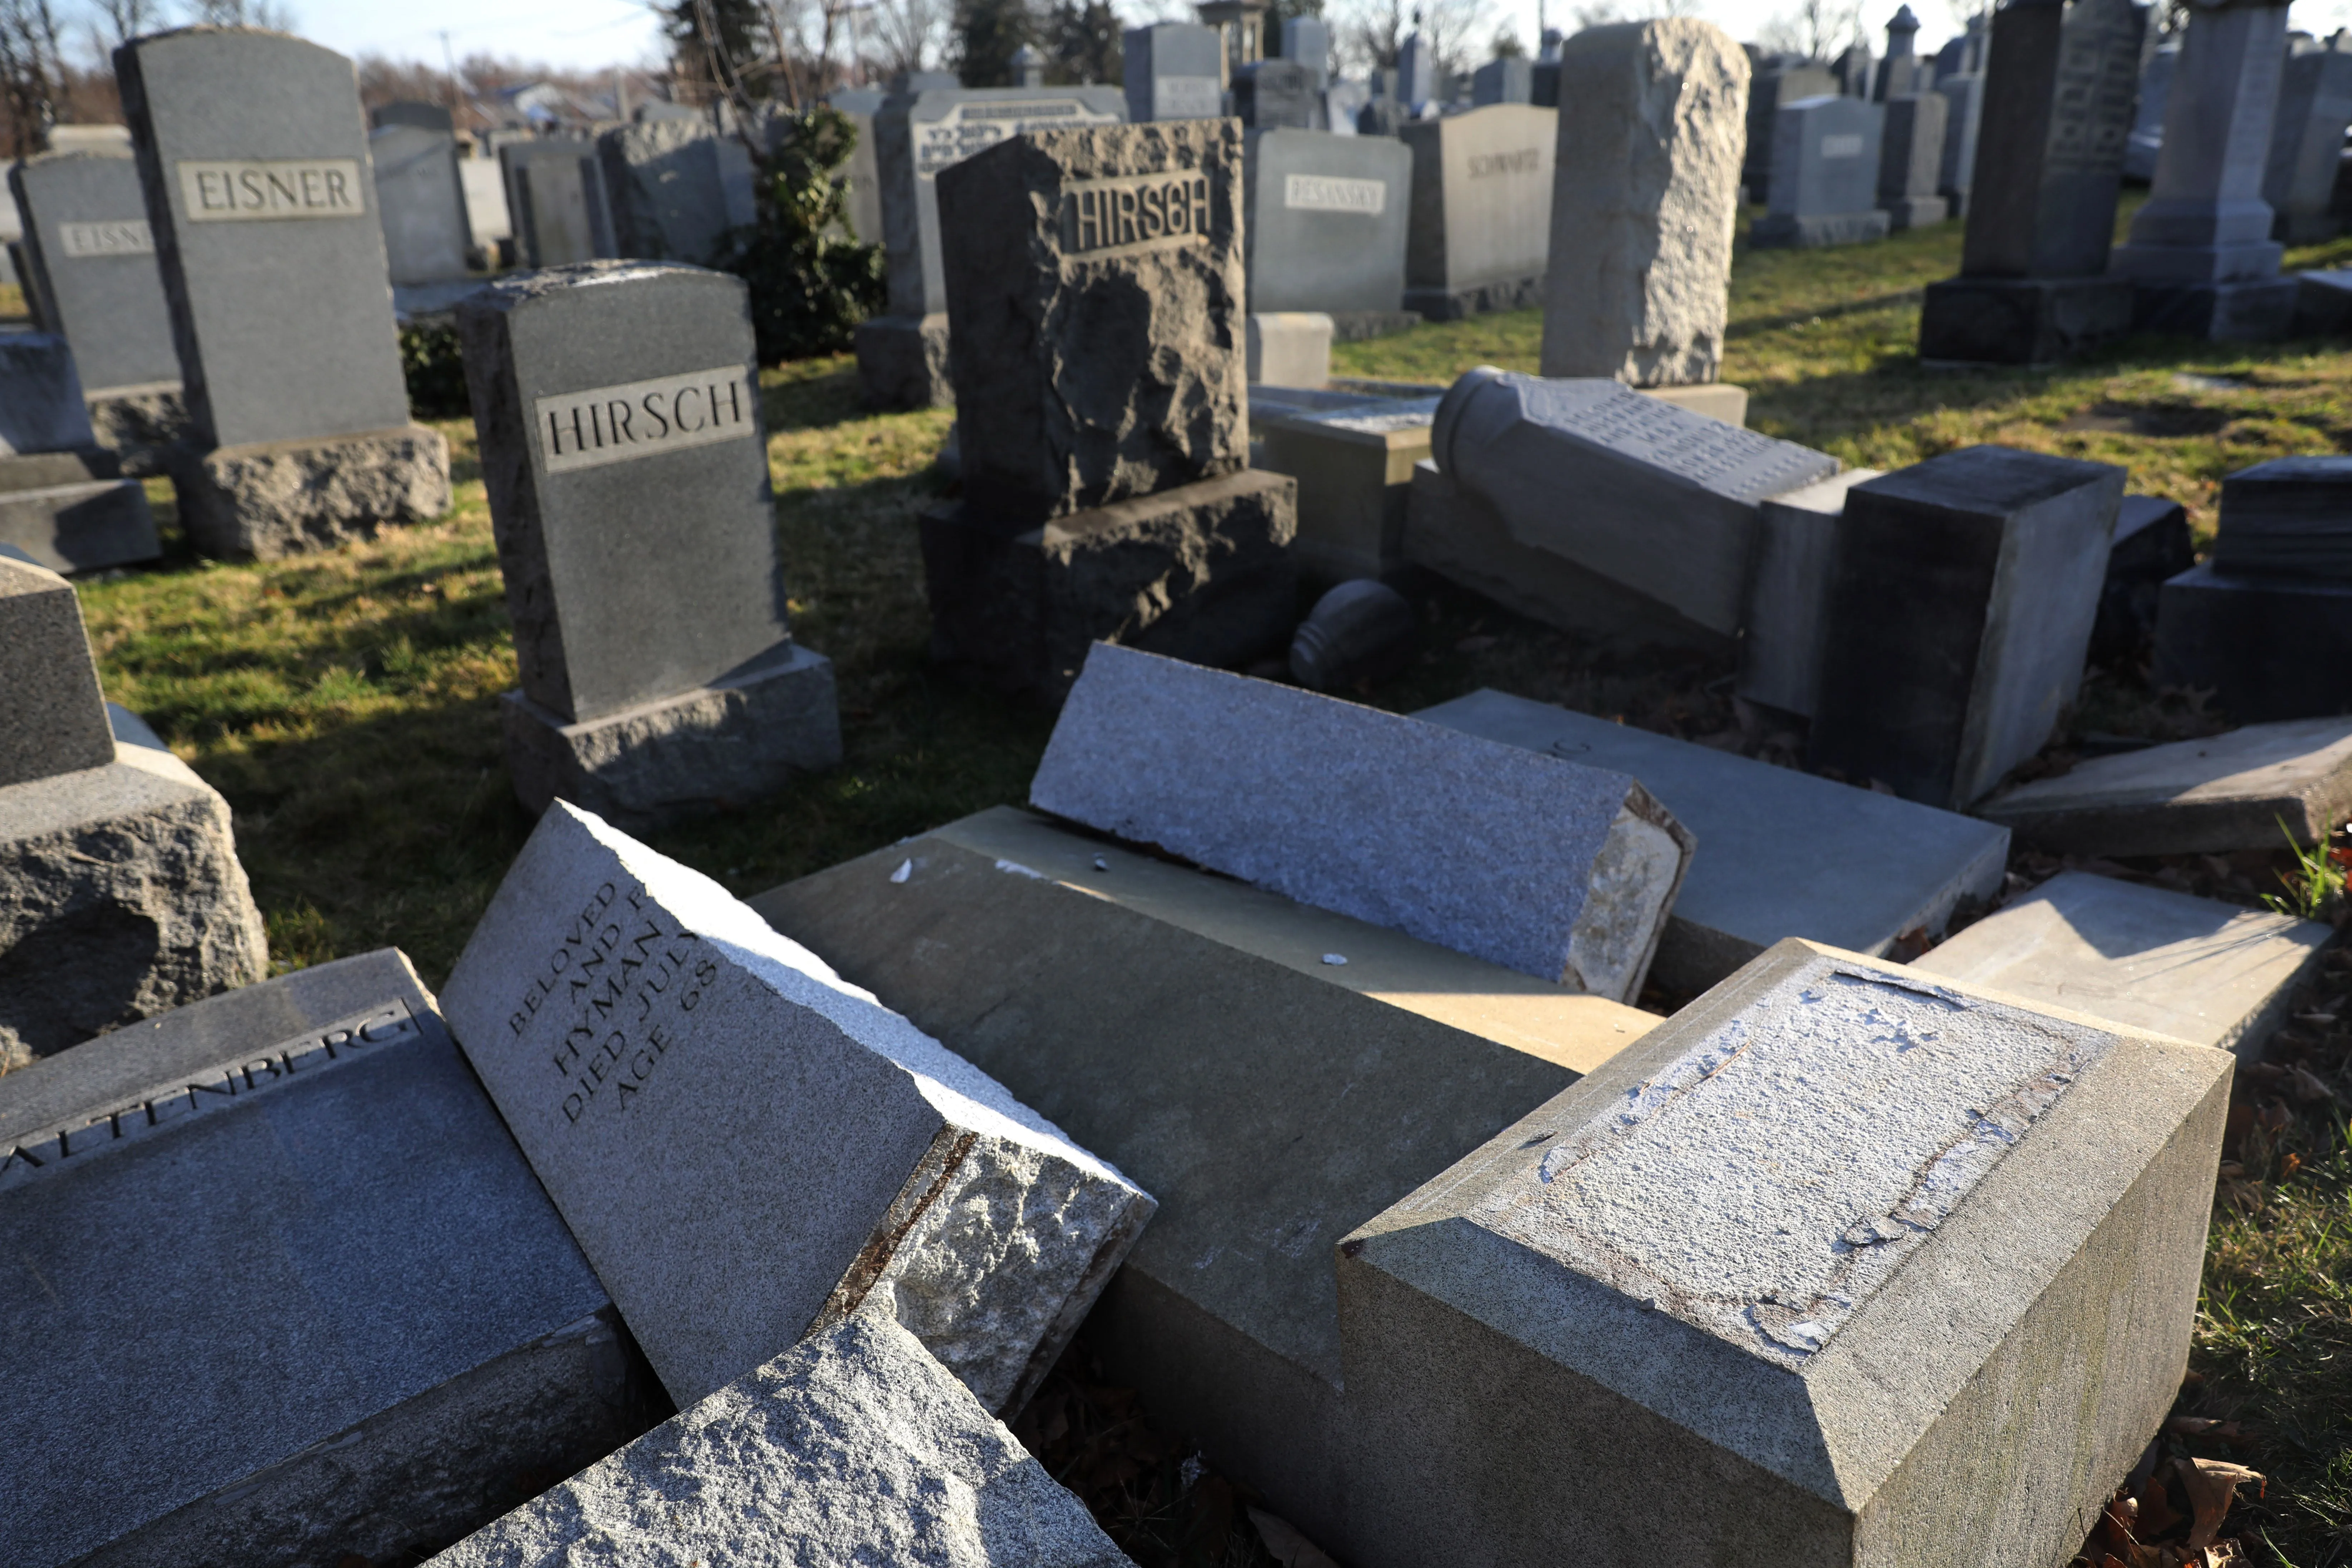 Vandalized tombstones are seen at the Jewish Mount Carmel Cemetery, Feb. 26, 2017, in Philadelphia.?w=200&h=150